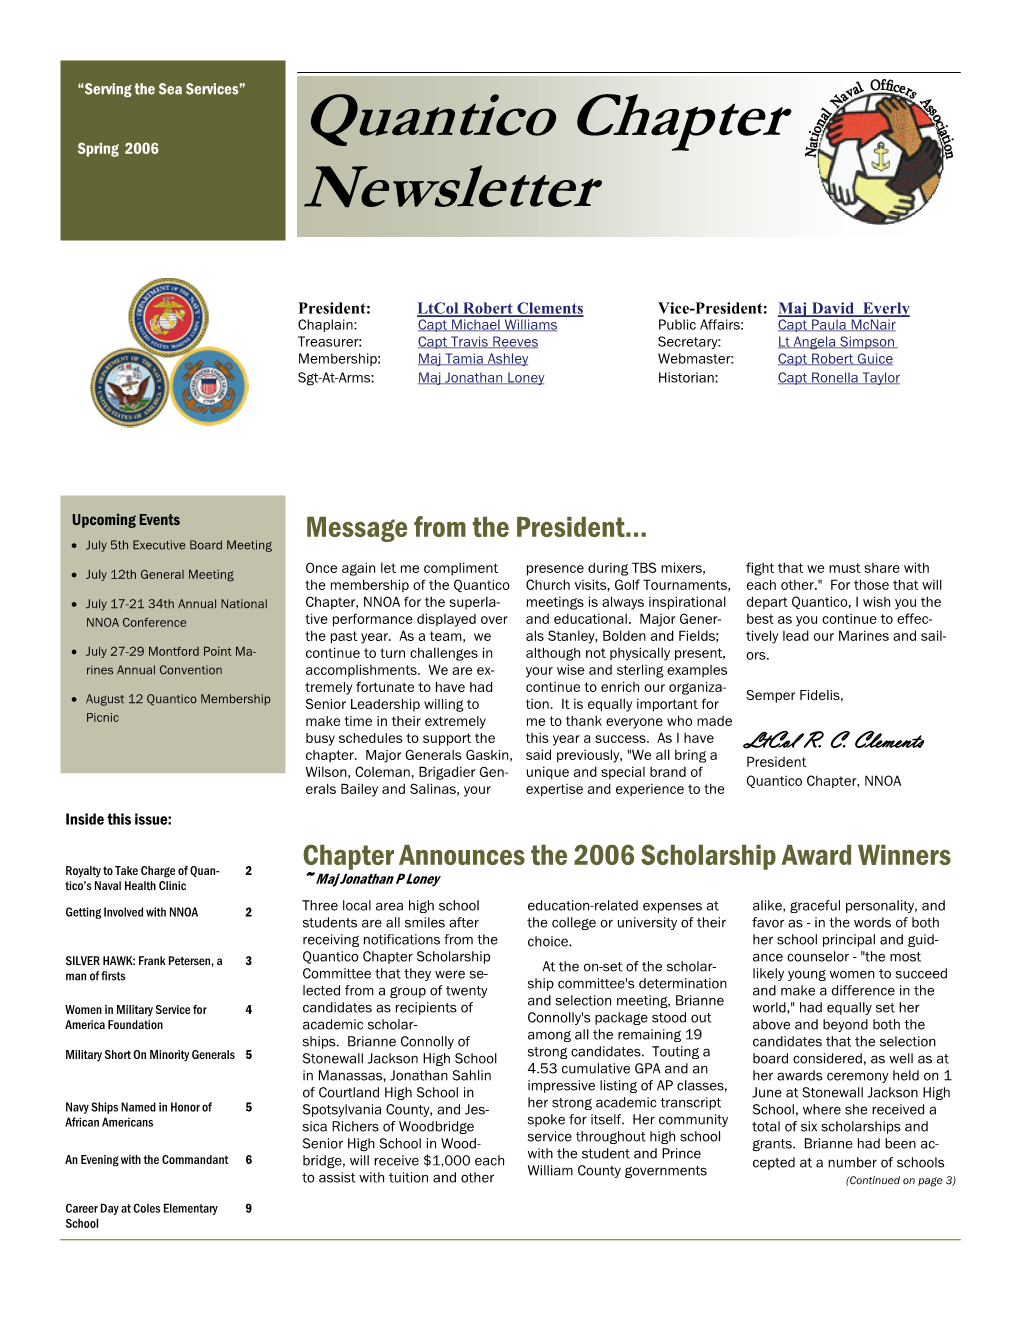 Quantico Chapter Newsletter